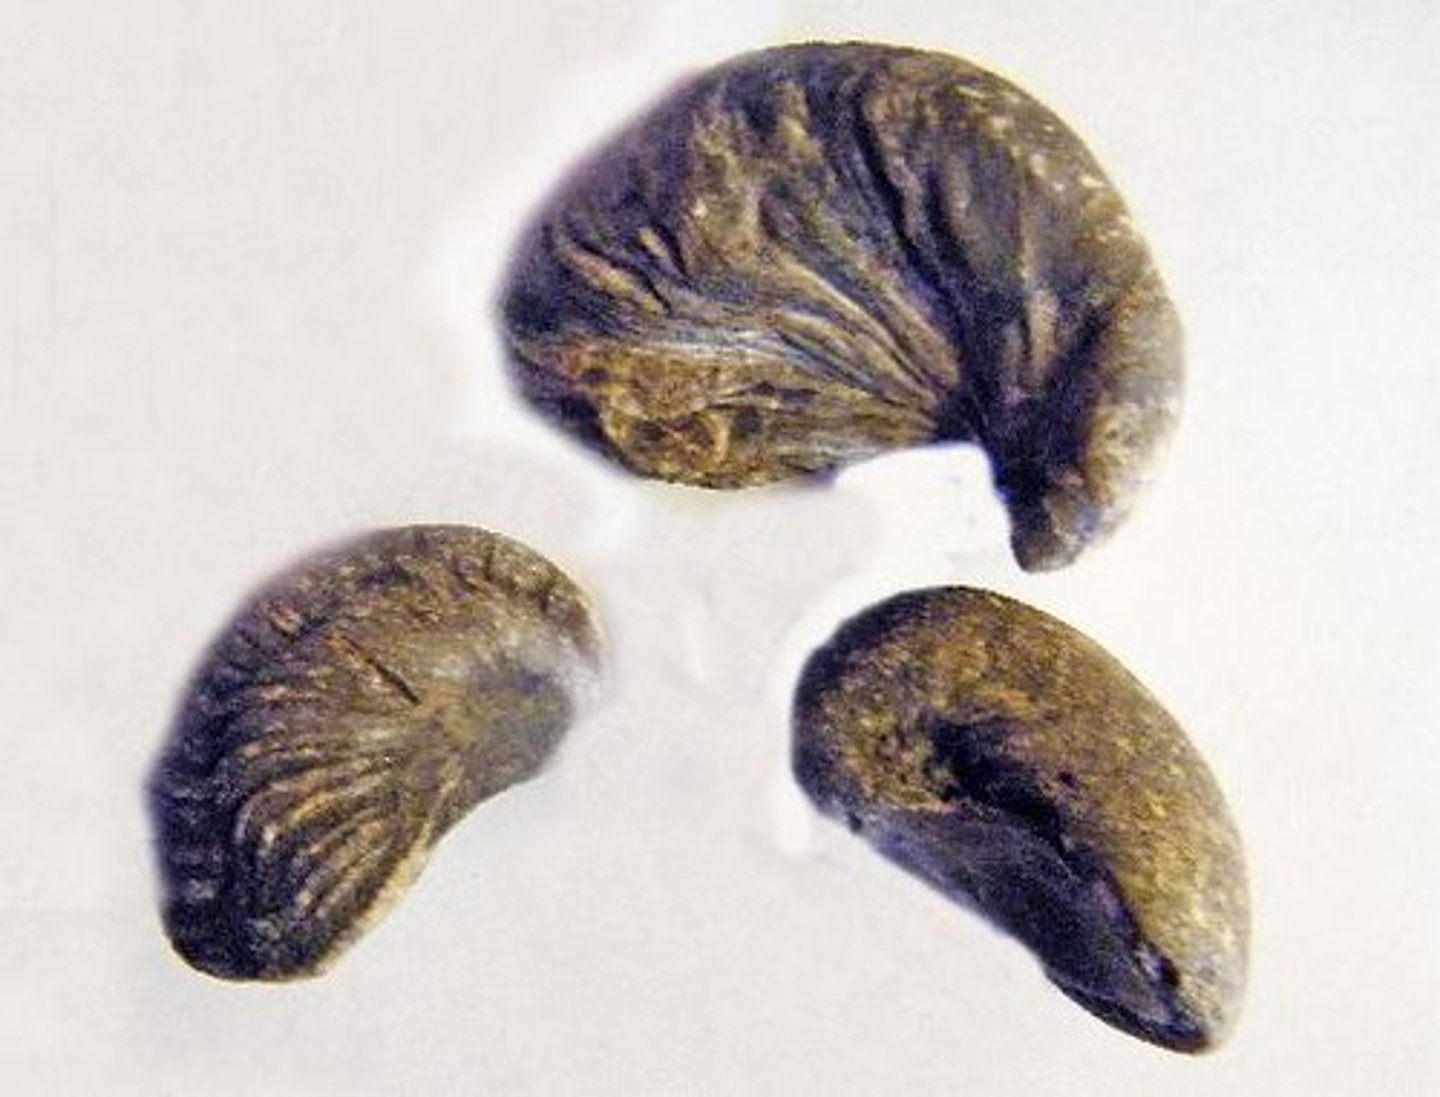 <p> a genus of extinct oysters which range from the Triassic period to the middle Paleogene period, but are mostly restricted to the Triassic and Jurassic.</p>